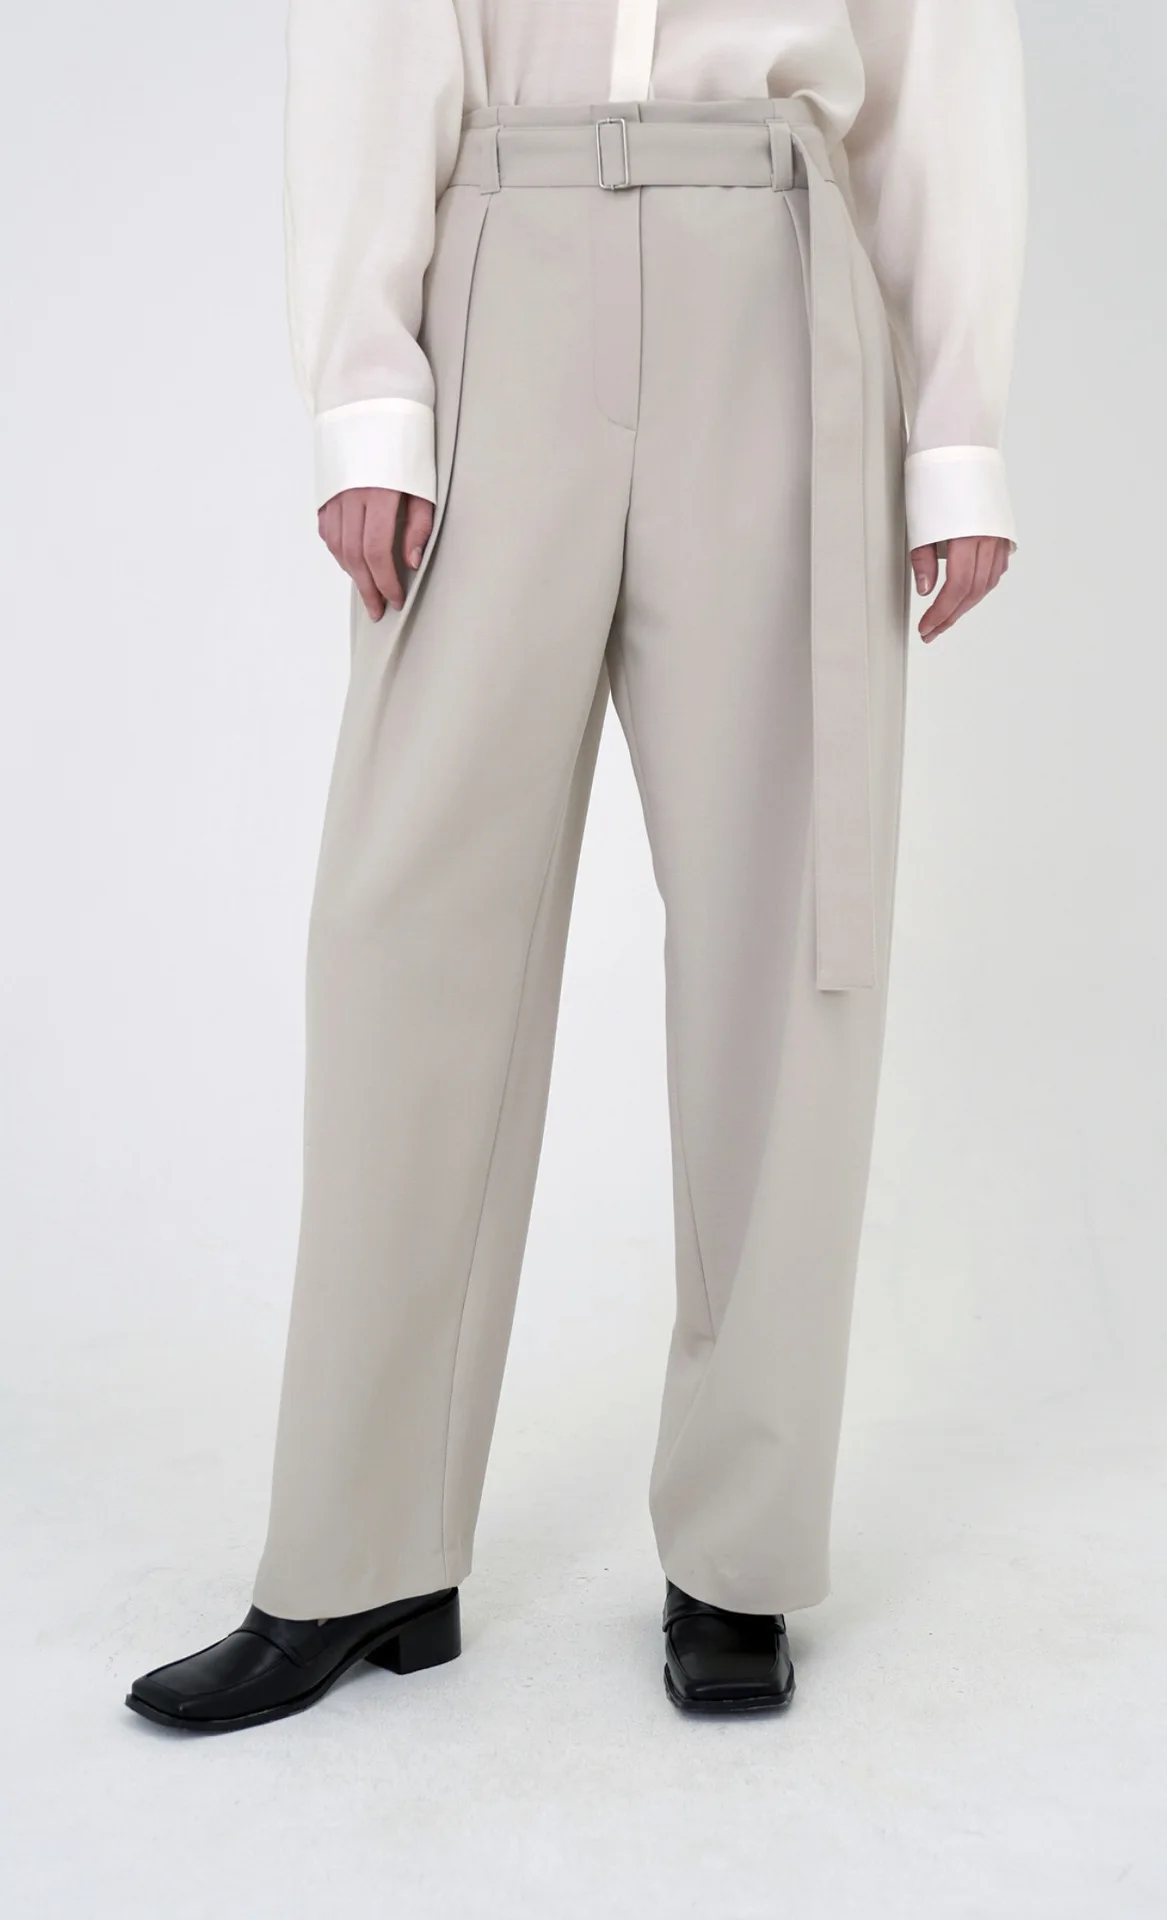 New Autumn Solid Color Trousers Women Loose High Waist Pleated Straight Casual Suit Pants